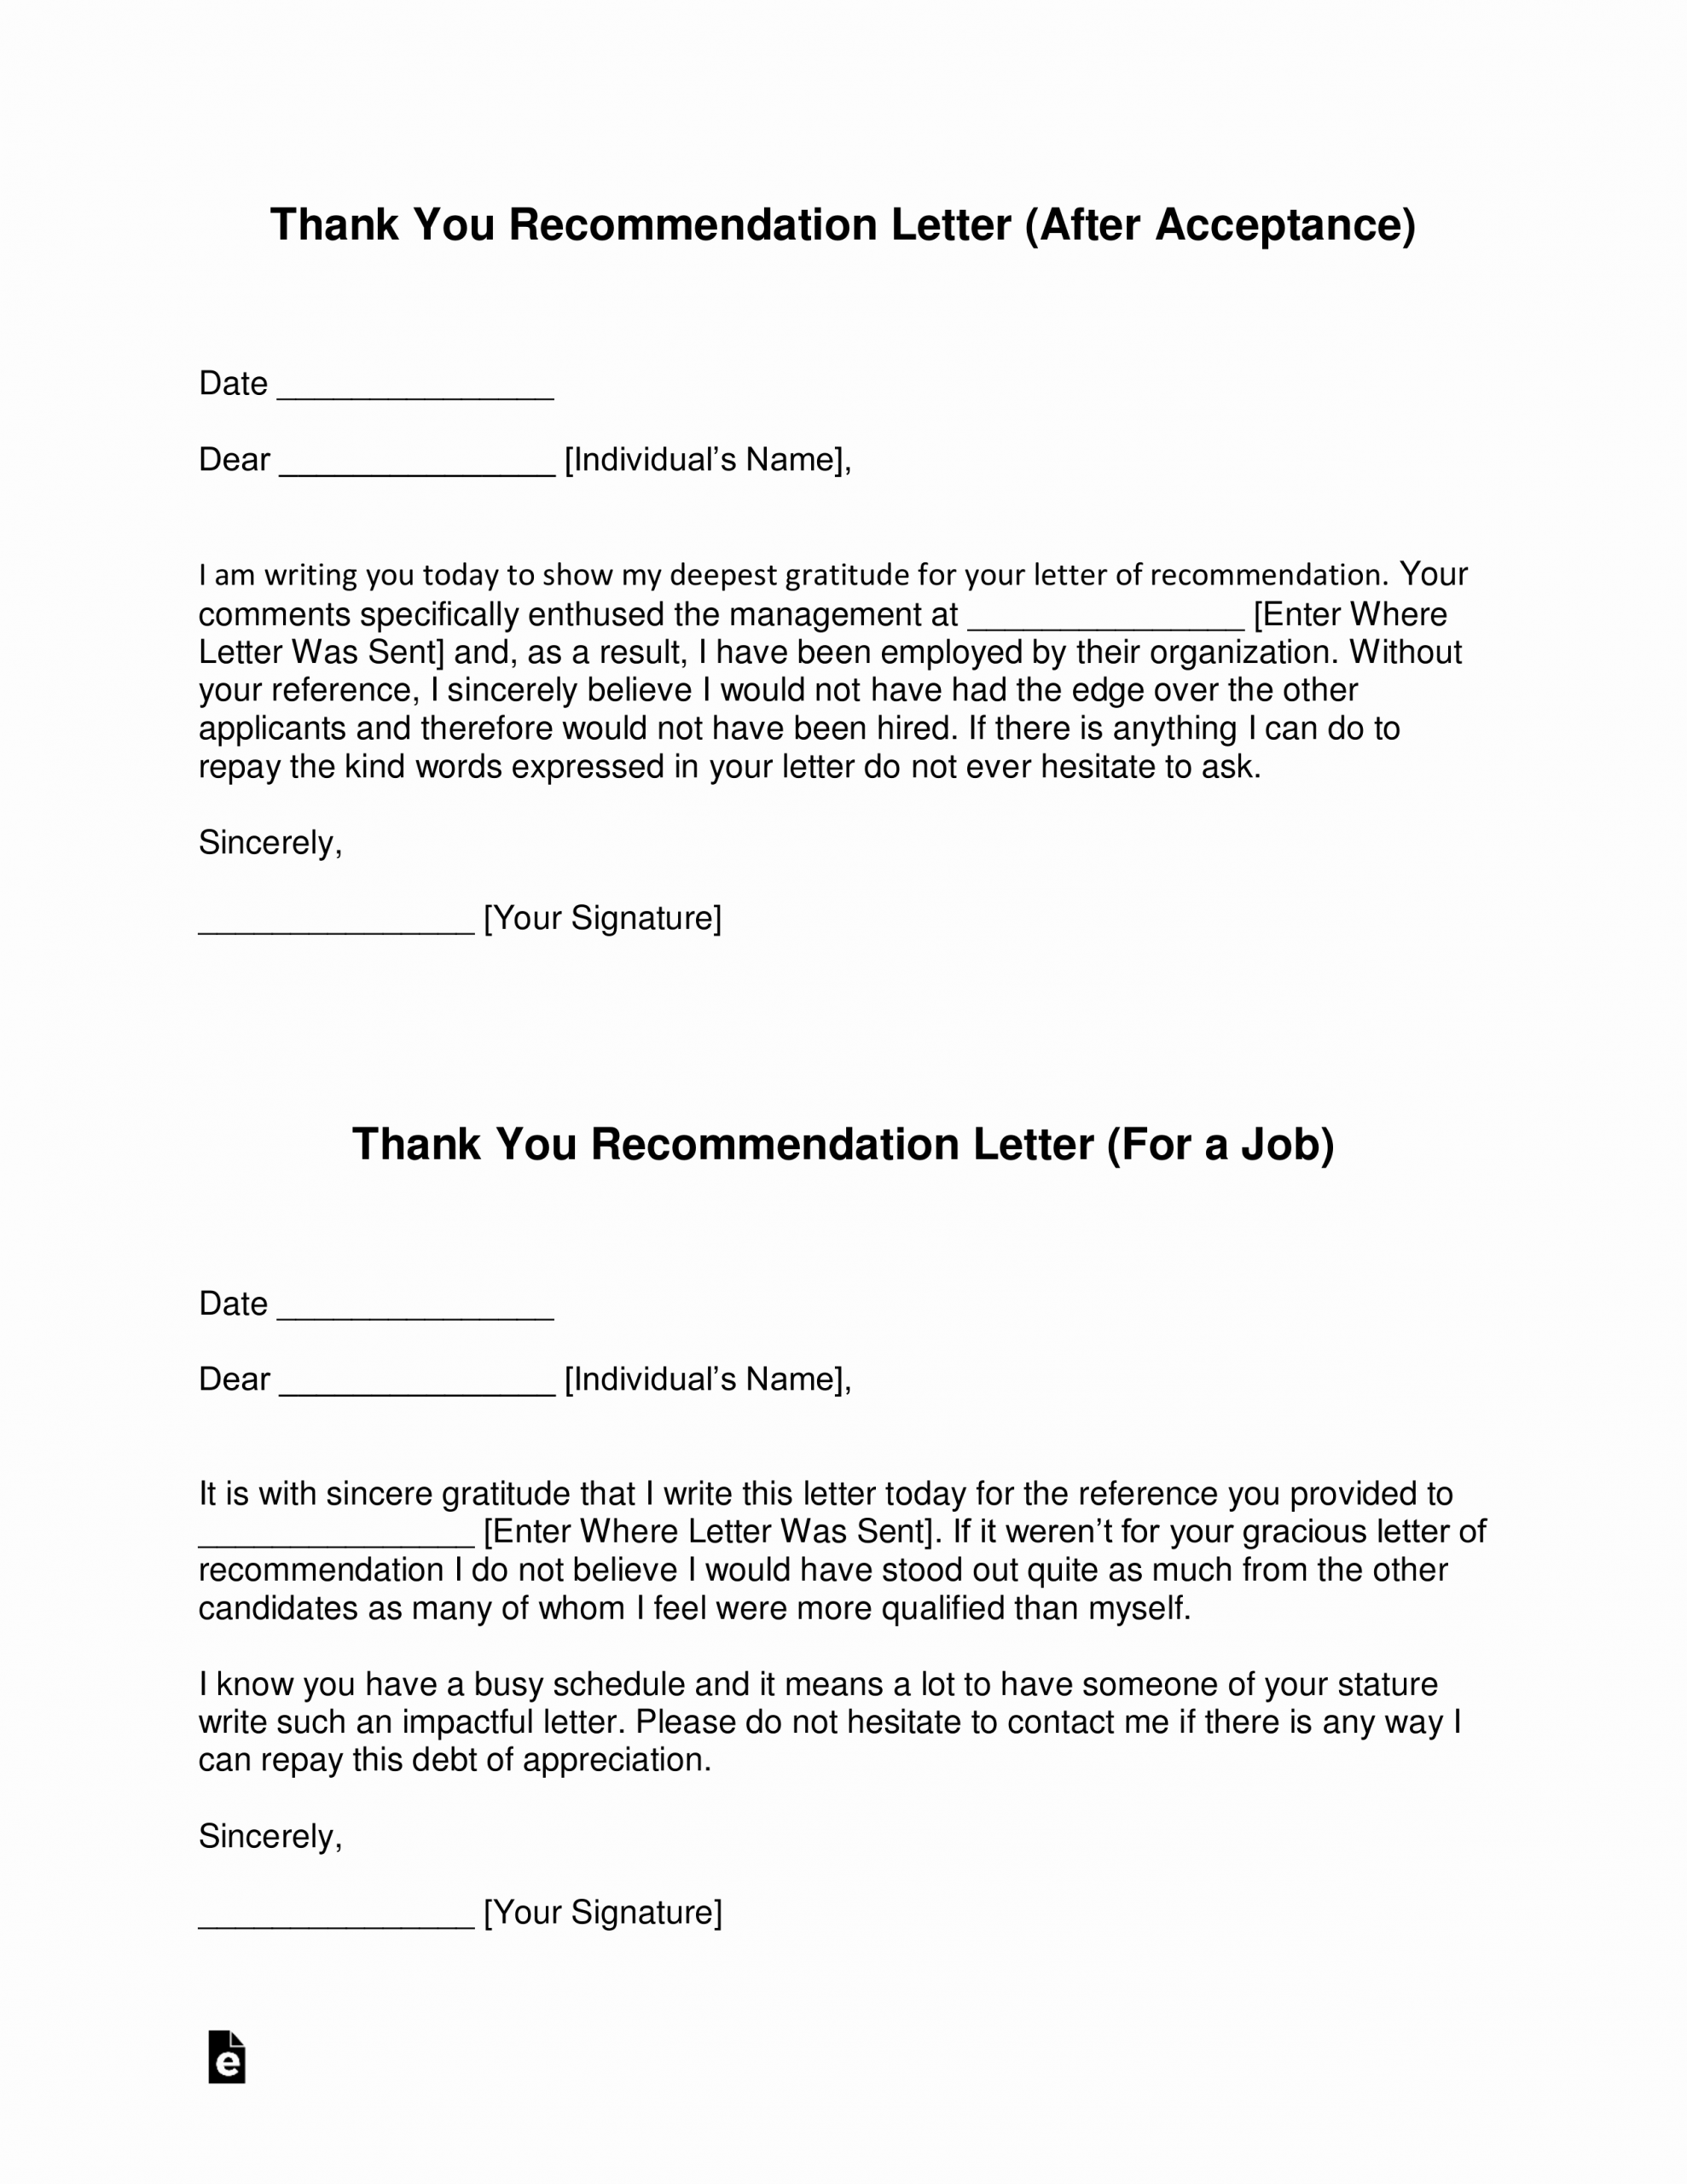 Thank You Letter for Referral Awesome Free Thank You Letter for Re Mendation Template with